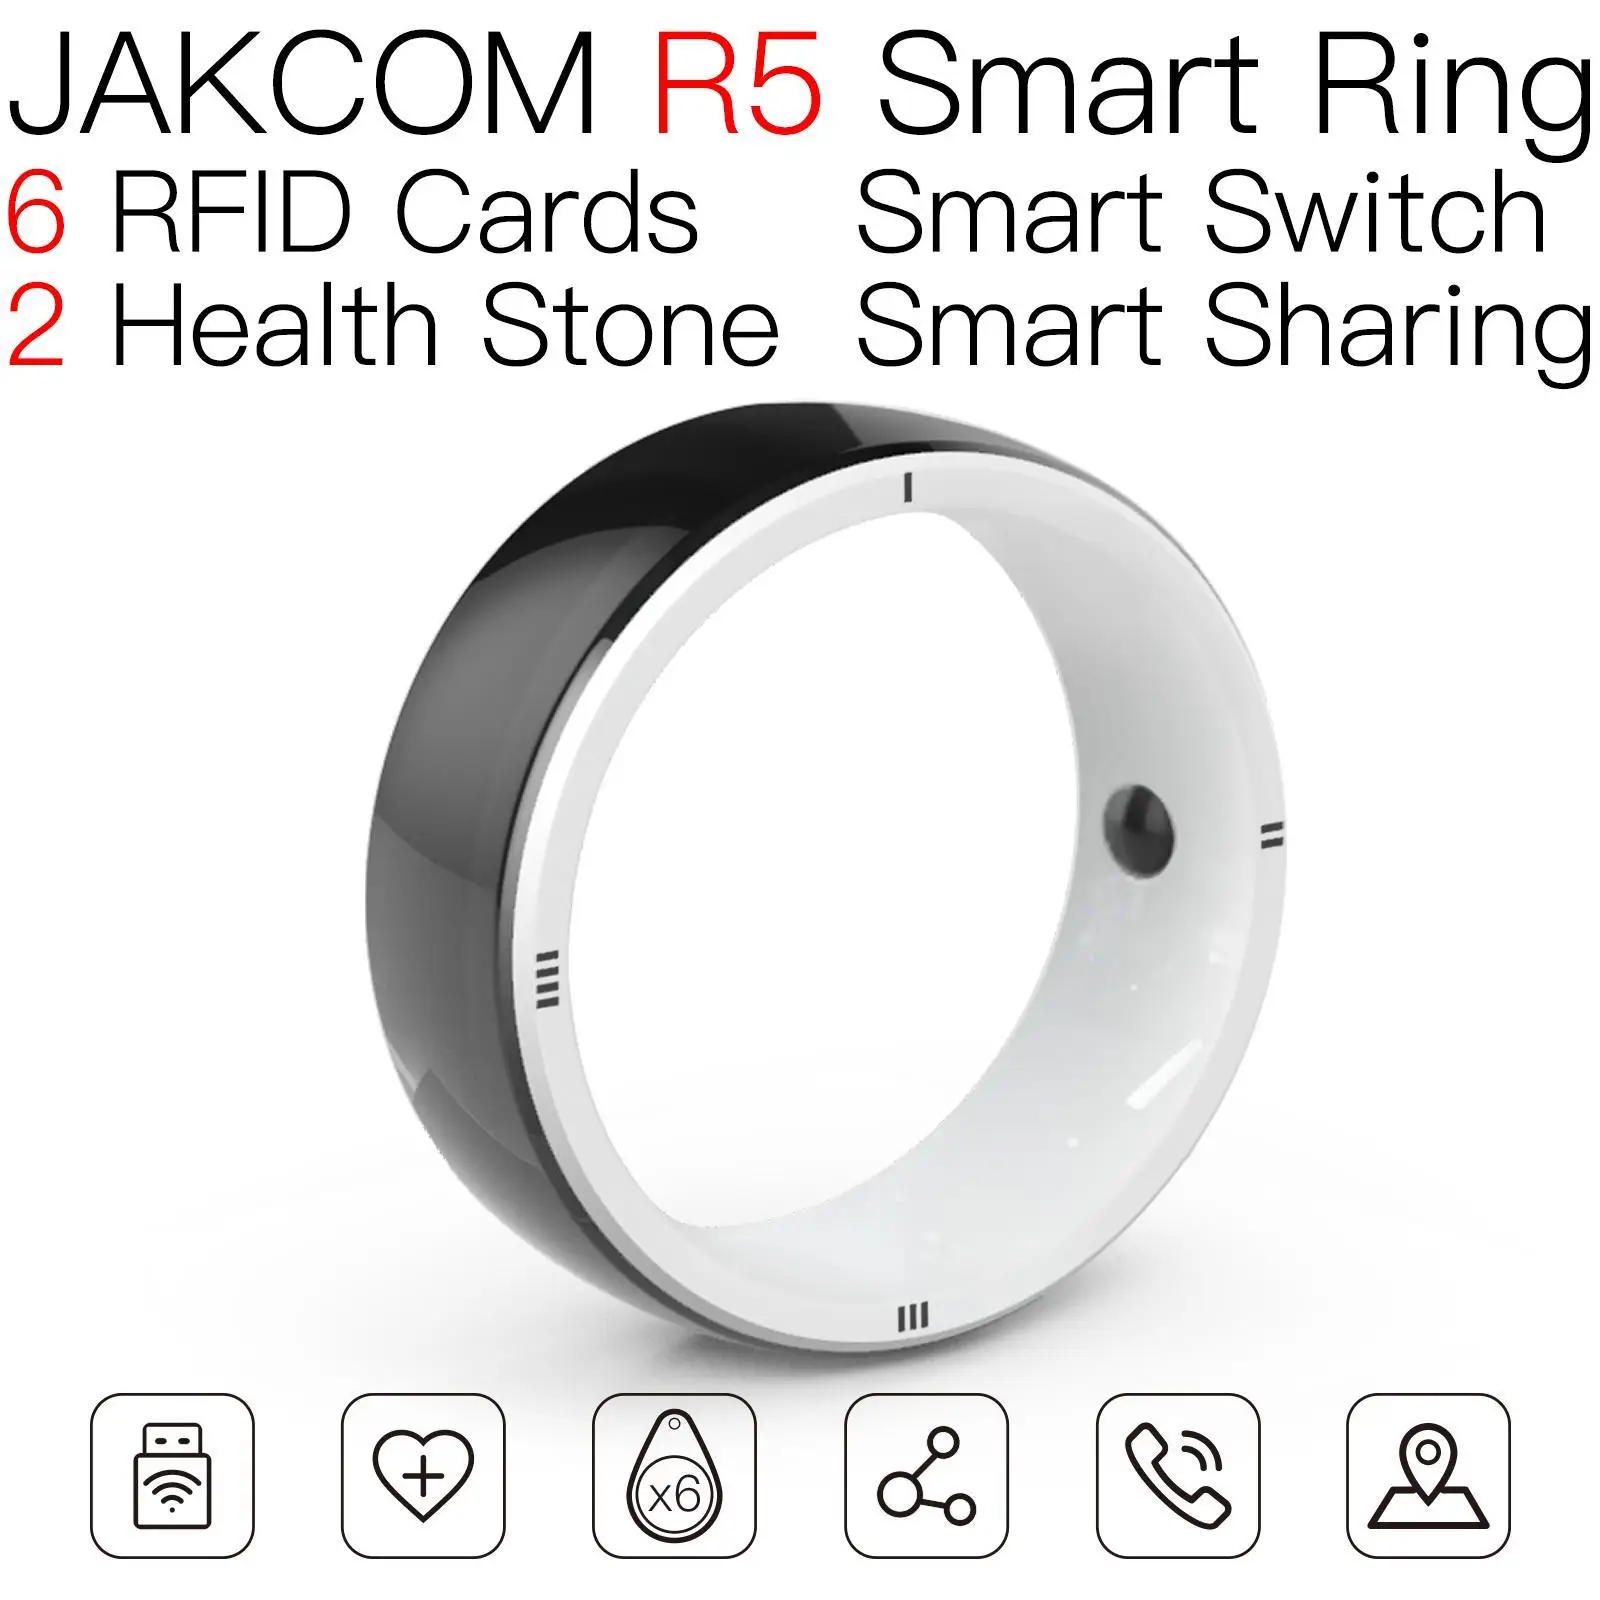 

JAKCOM R5 Smart Ring Newer than card with nfc tag uid block 0 owon battery mini 125 rfid jc id d11 eco mode switch payment